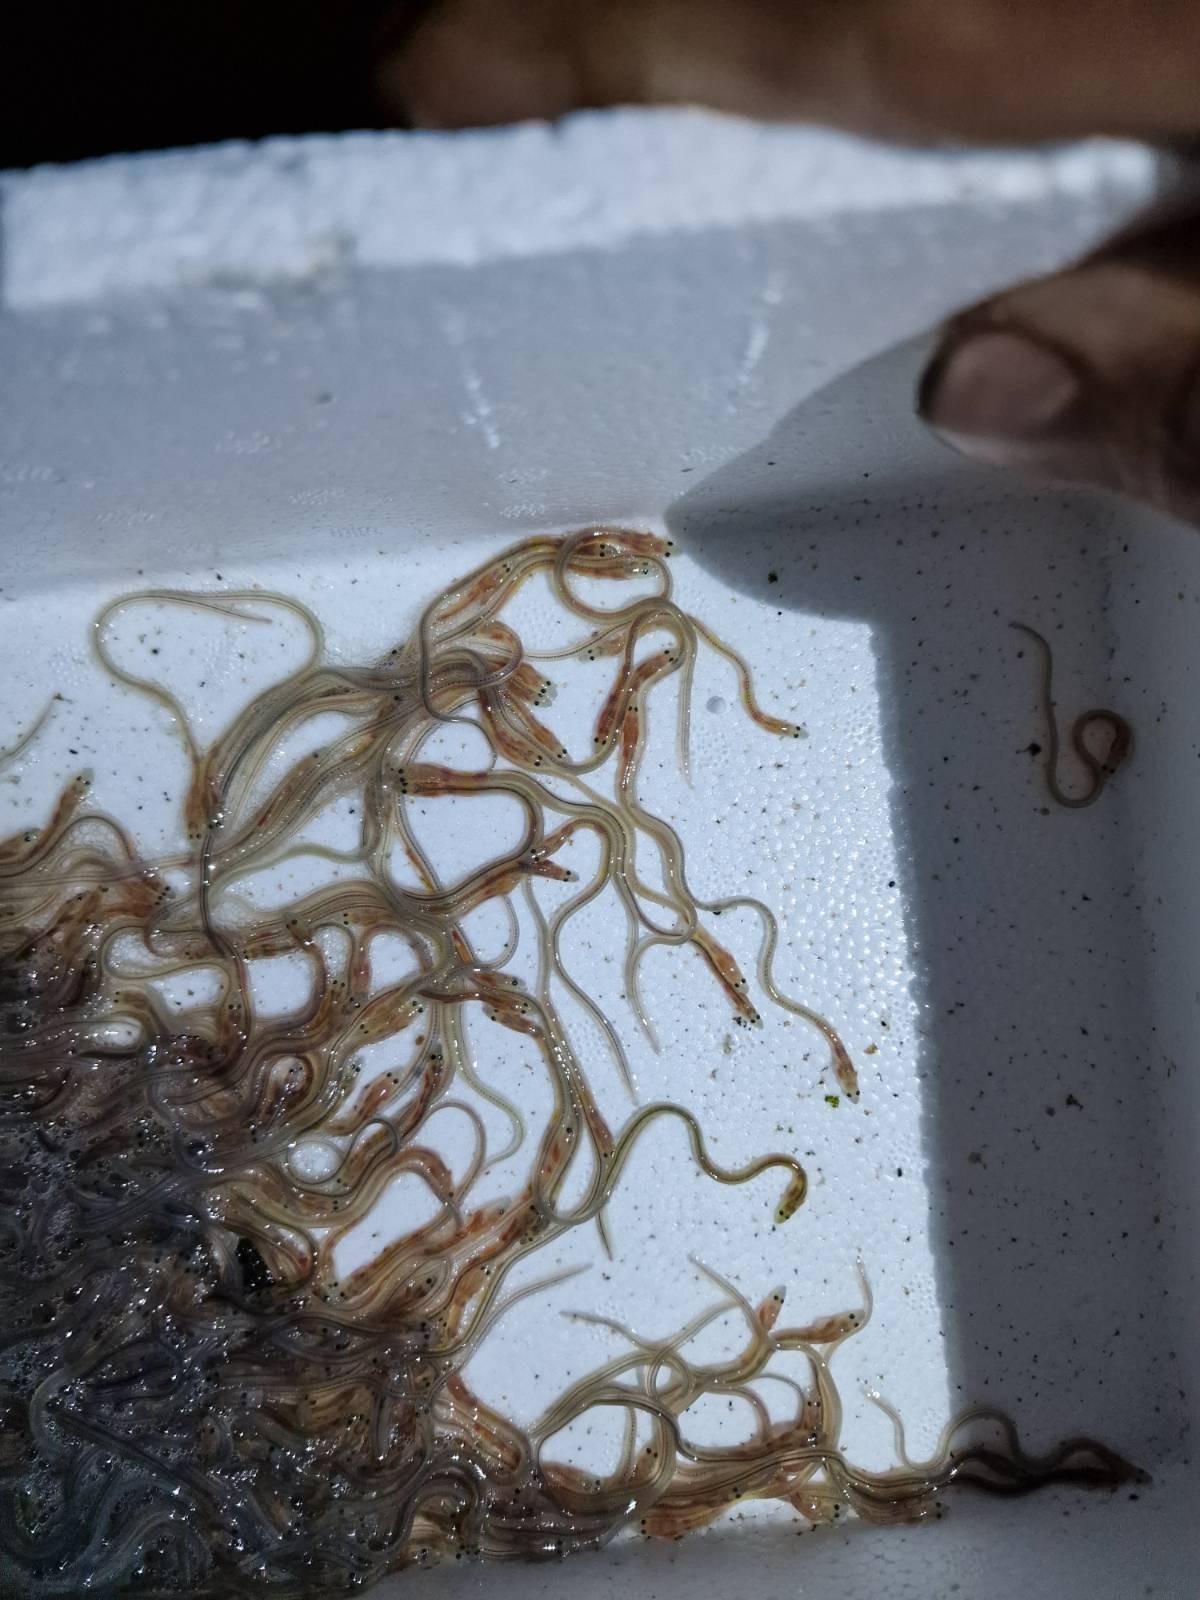 Young eels ready for release